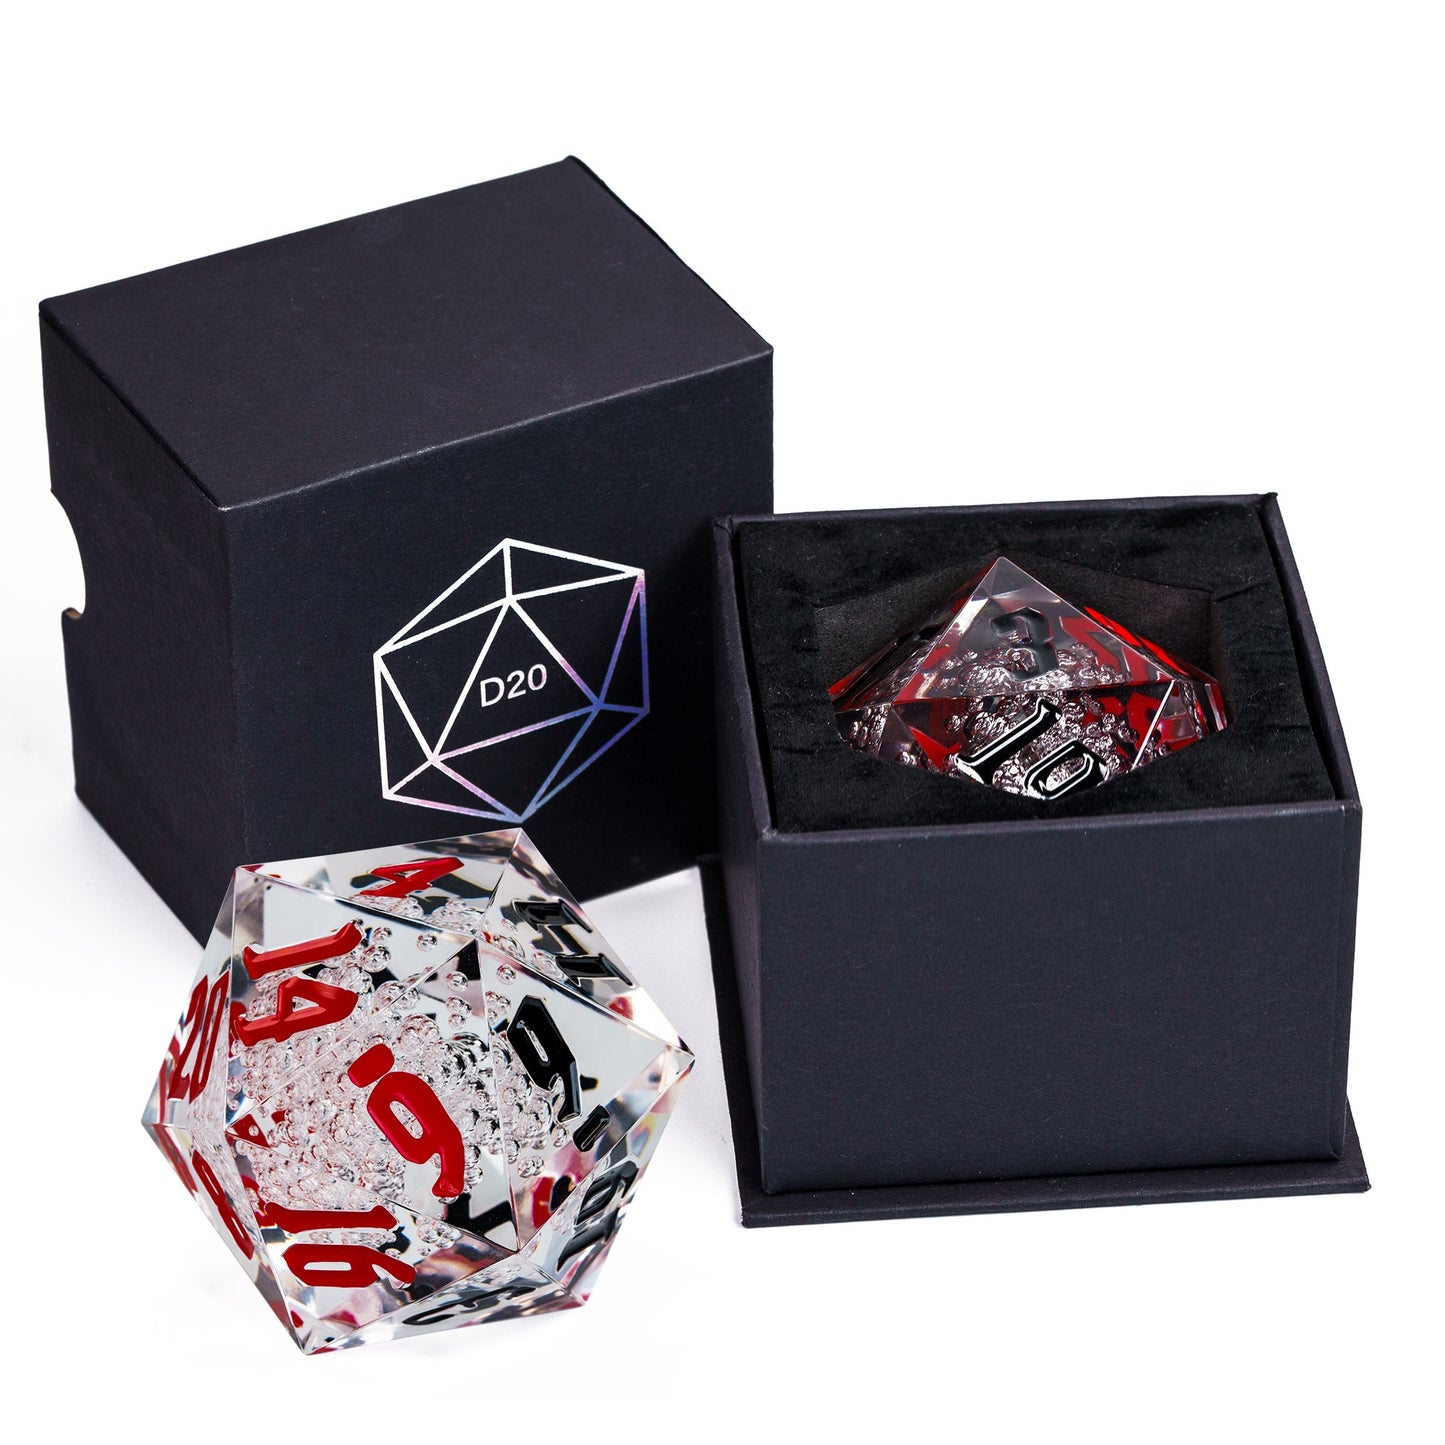 The GIANT D20